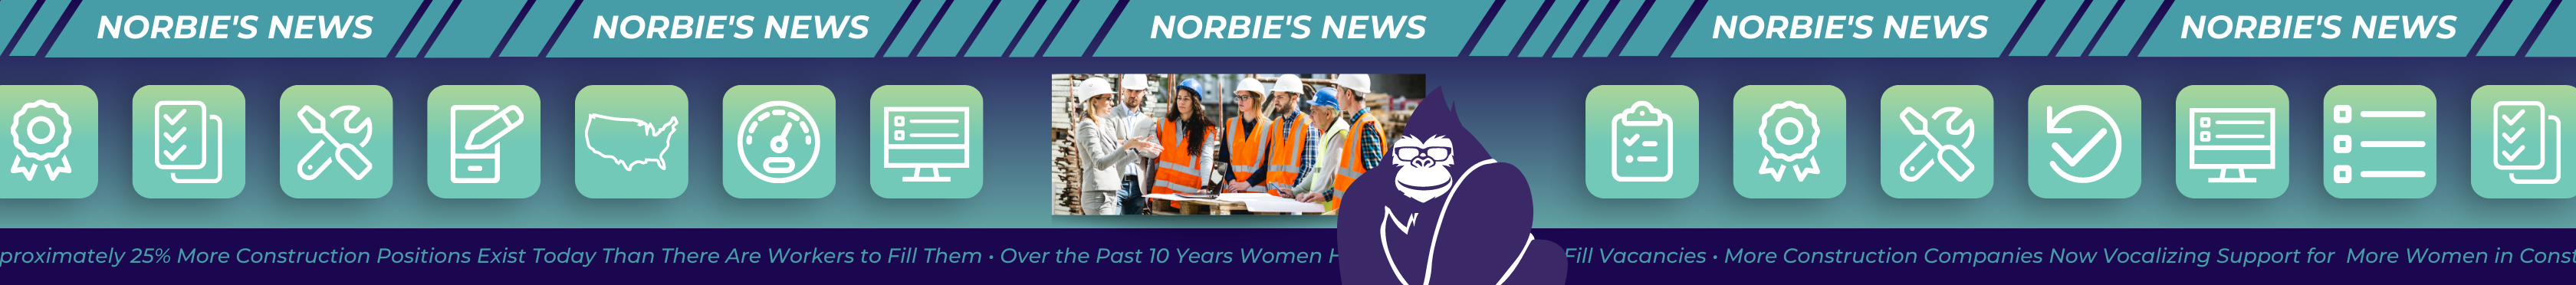 Header 9 - More Construction Companies Look to Women